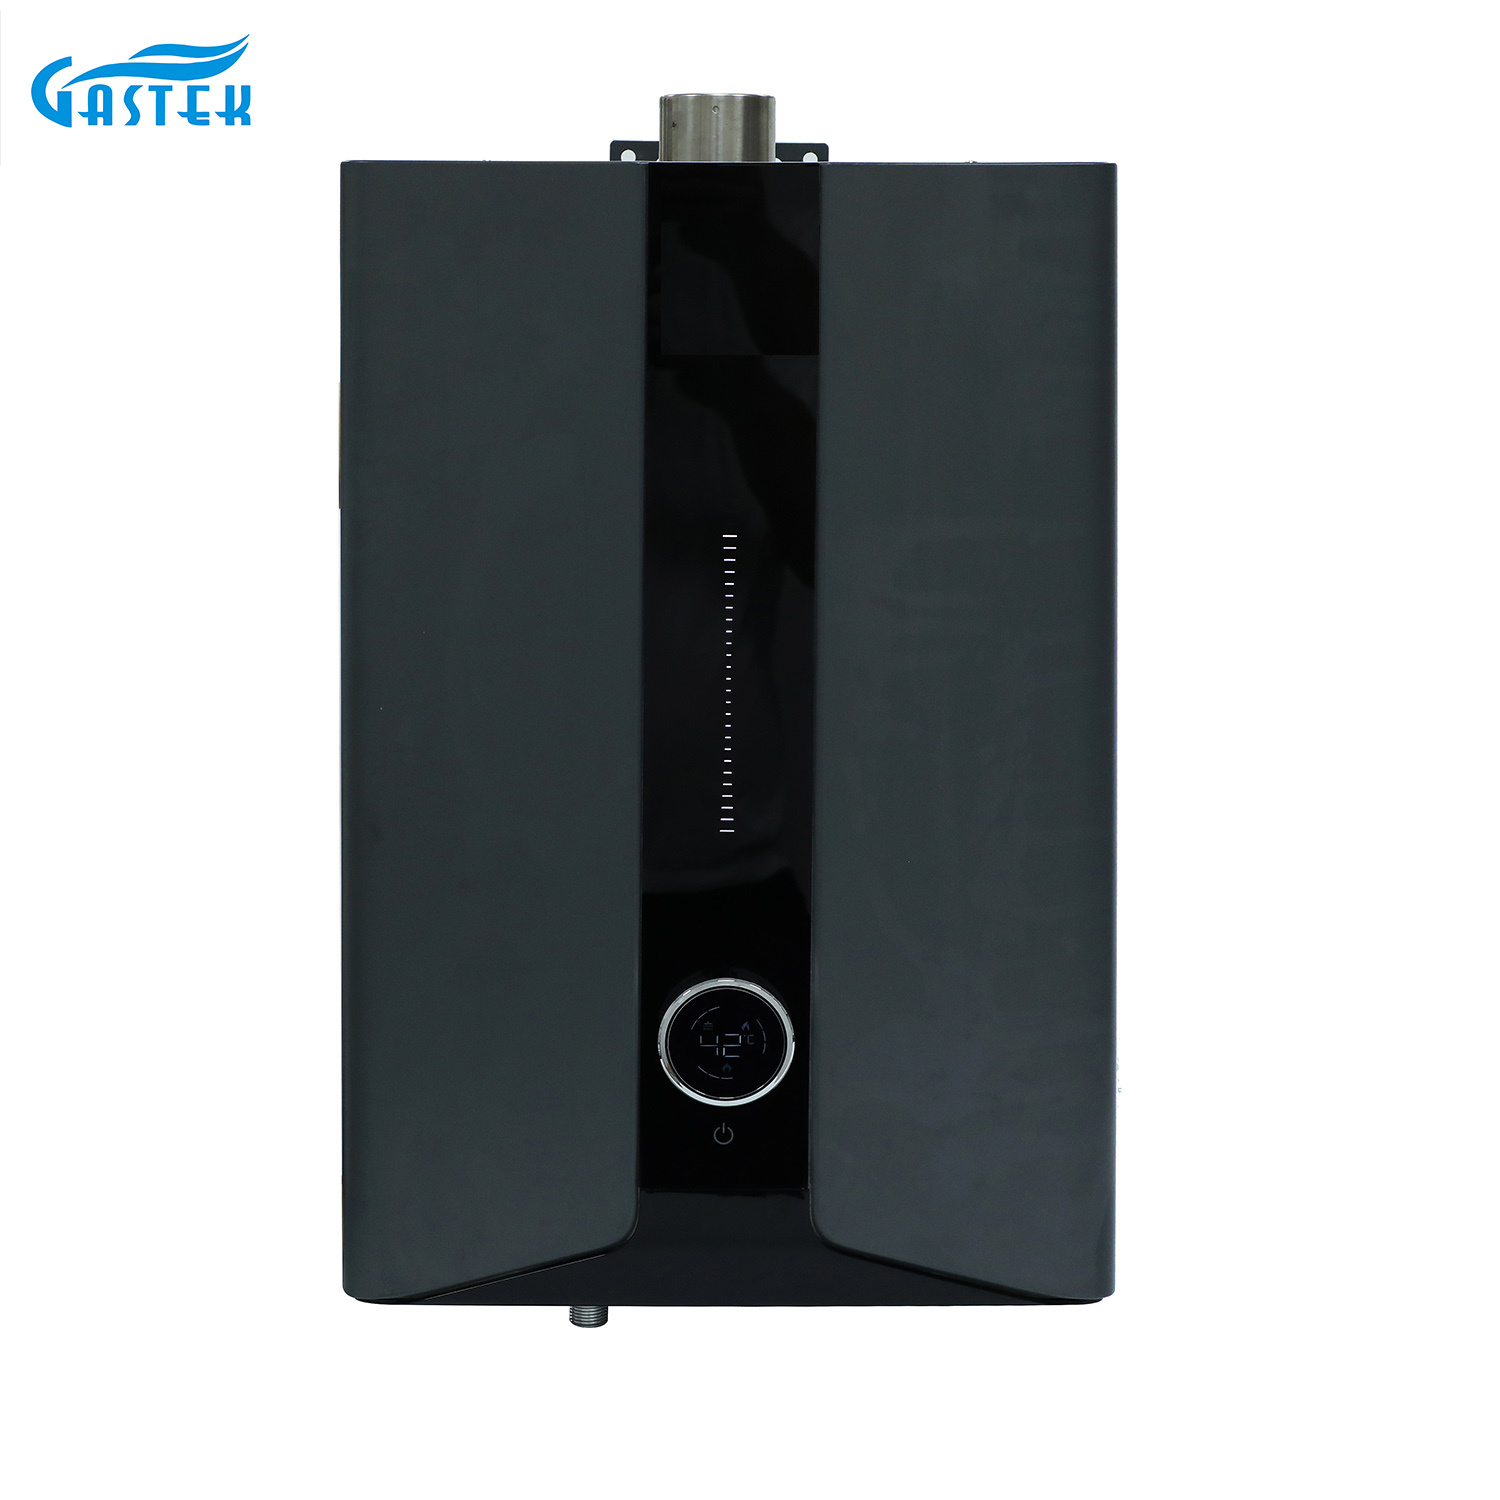 Household Gas Water Heater Constant Temperature Forced Type 12L Compact Size Gas Geyser for Shower